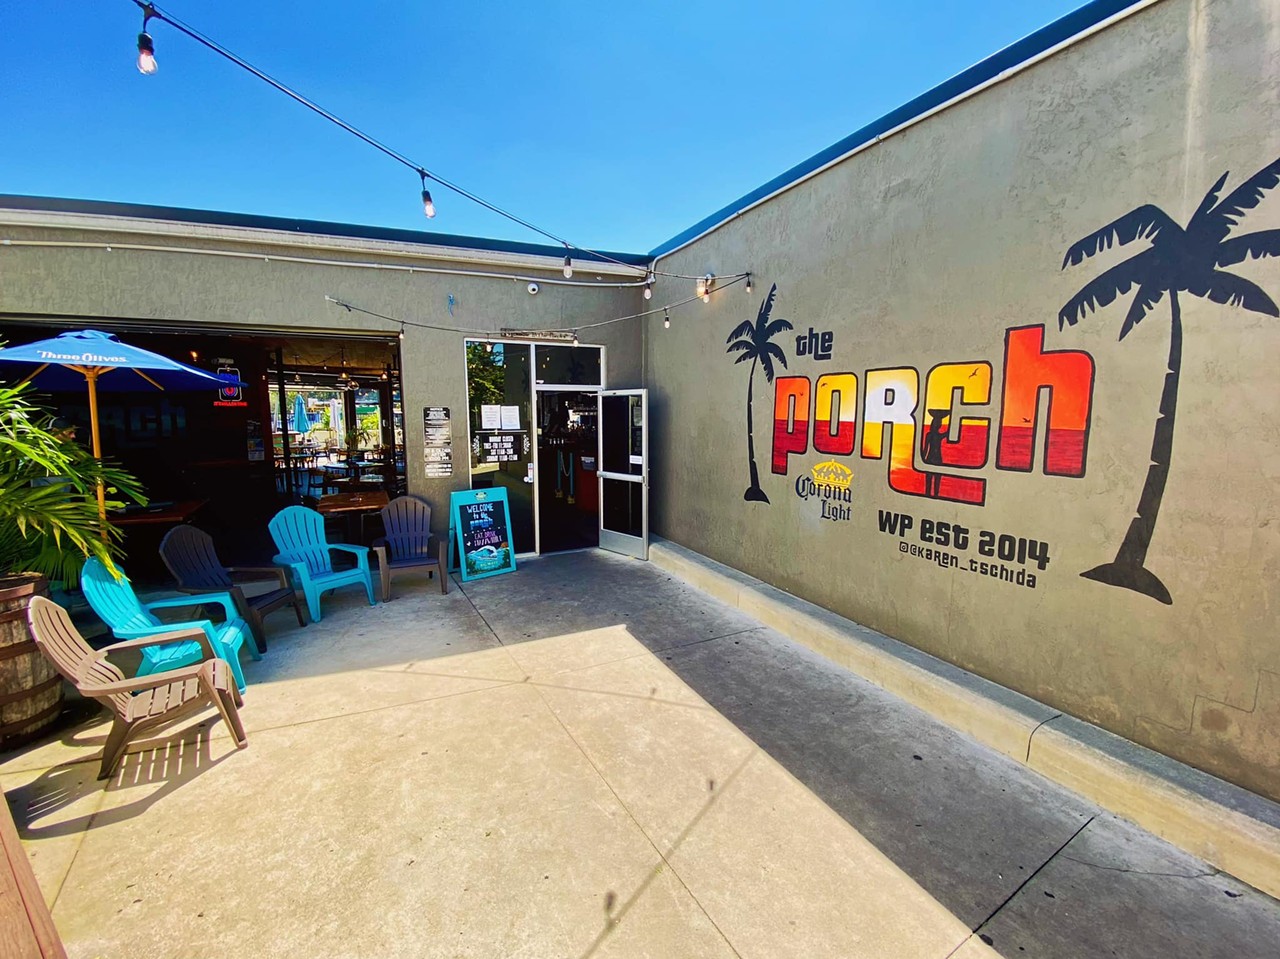 The Porch 
407-571-9101, 643 N Orange Ave, Winter Park
”Eat, Drink, and Stay awhile!” This popular sports bar earns points for creativity with its location, residing inside a converted garage. Frequently entertaining locals with trivia nights, special viewings of sports games and more, this is absolutely a place you’ll want to check out on your next trip over to Winter Park.
